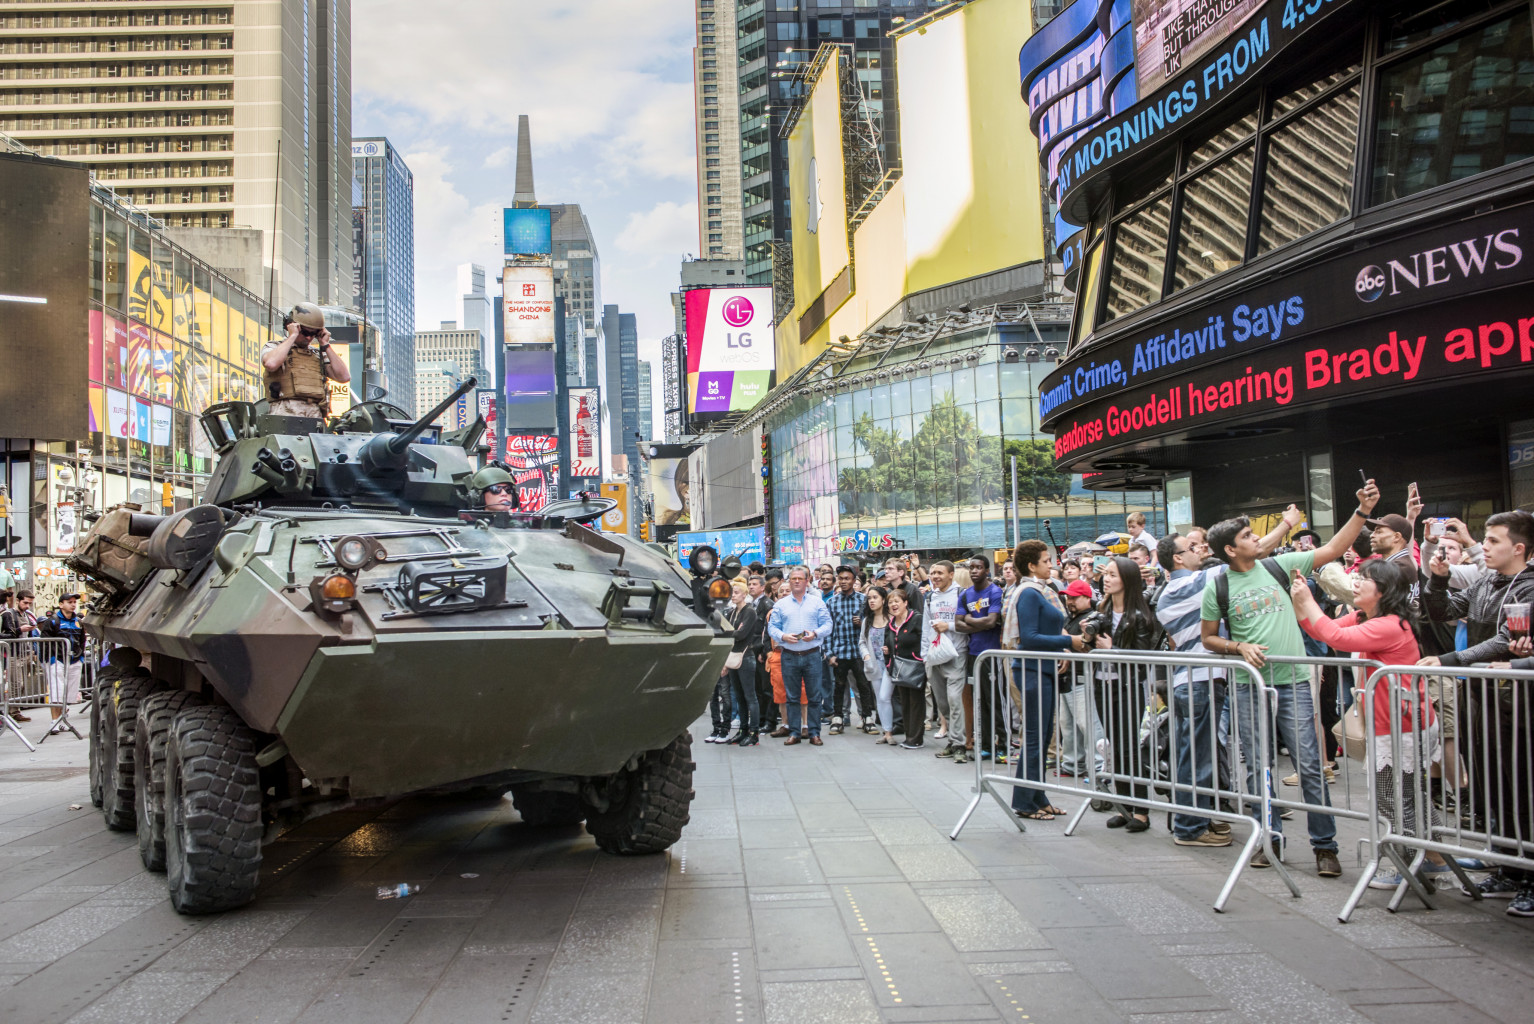 ©Nina Berman/ NOOR Caption: USA, New York, 2015, US Marines in Times Square for Fleet Week  - demonstration weapons including rifles and arriving in an armored personnel carrier. IG: @nina_berman Twitter: @ninaberman